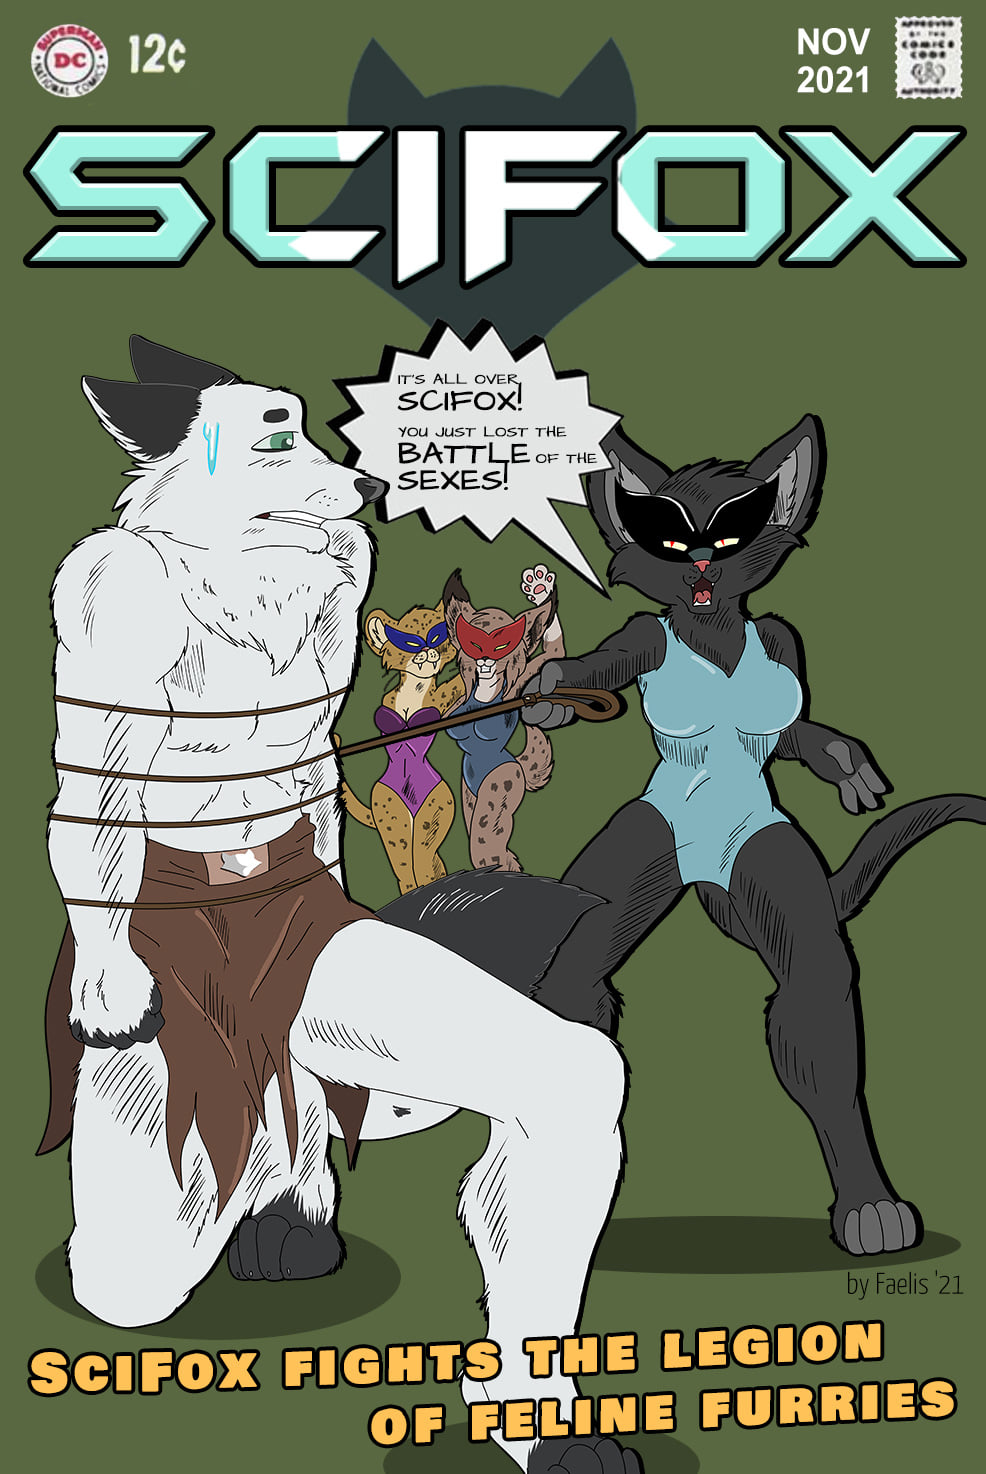 SciFox fights the legion of feline furries furies and just lost the battle of the sexes